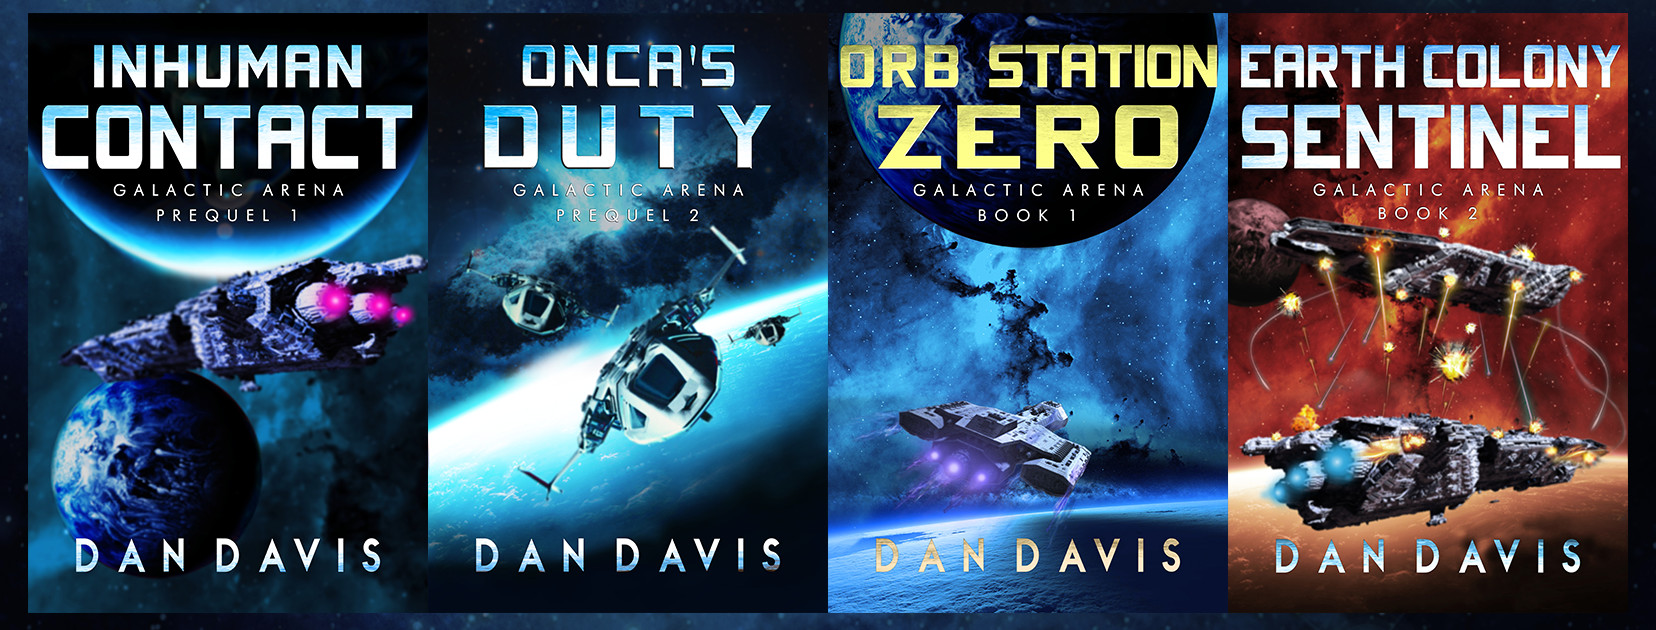 Galactic Arena New scifi covers 2017